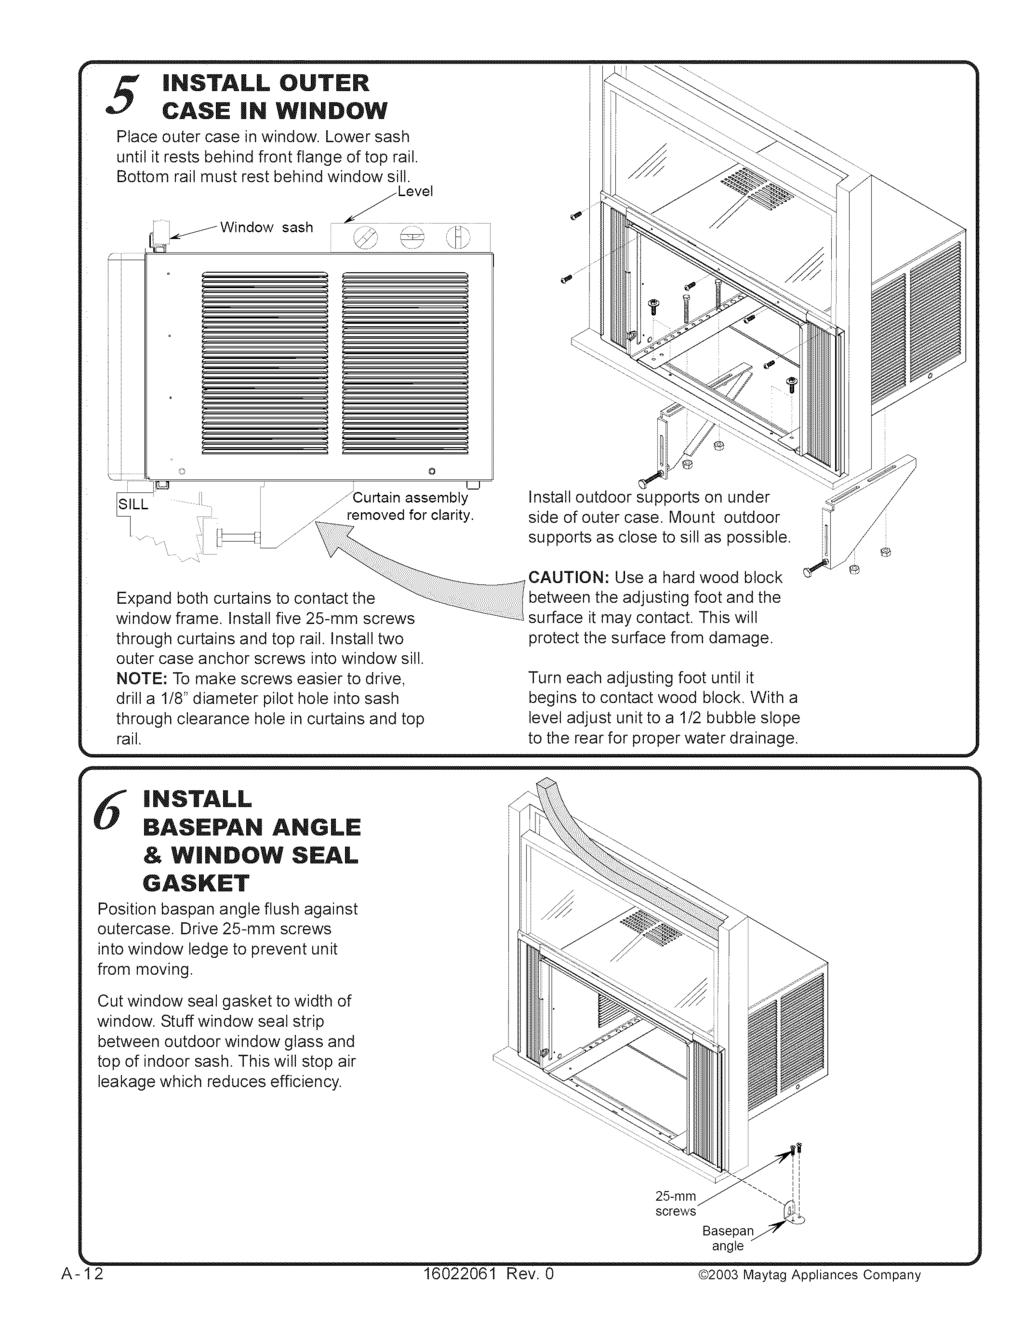 install CASE IN WINDOW OUTER Place outer case in window. Lower sash until it rests behind front flange of top rail. Bottom rail must rest behind window sill. o... -Curtain assembly.